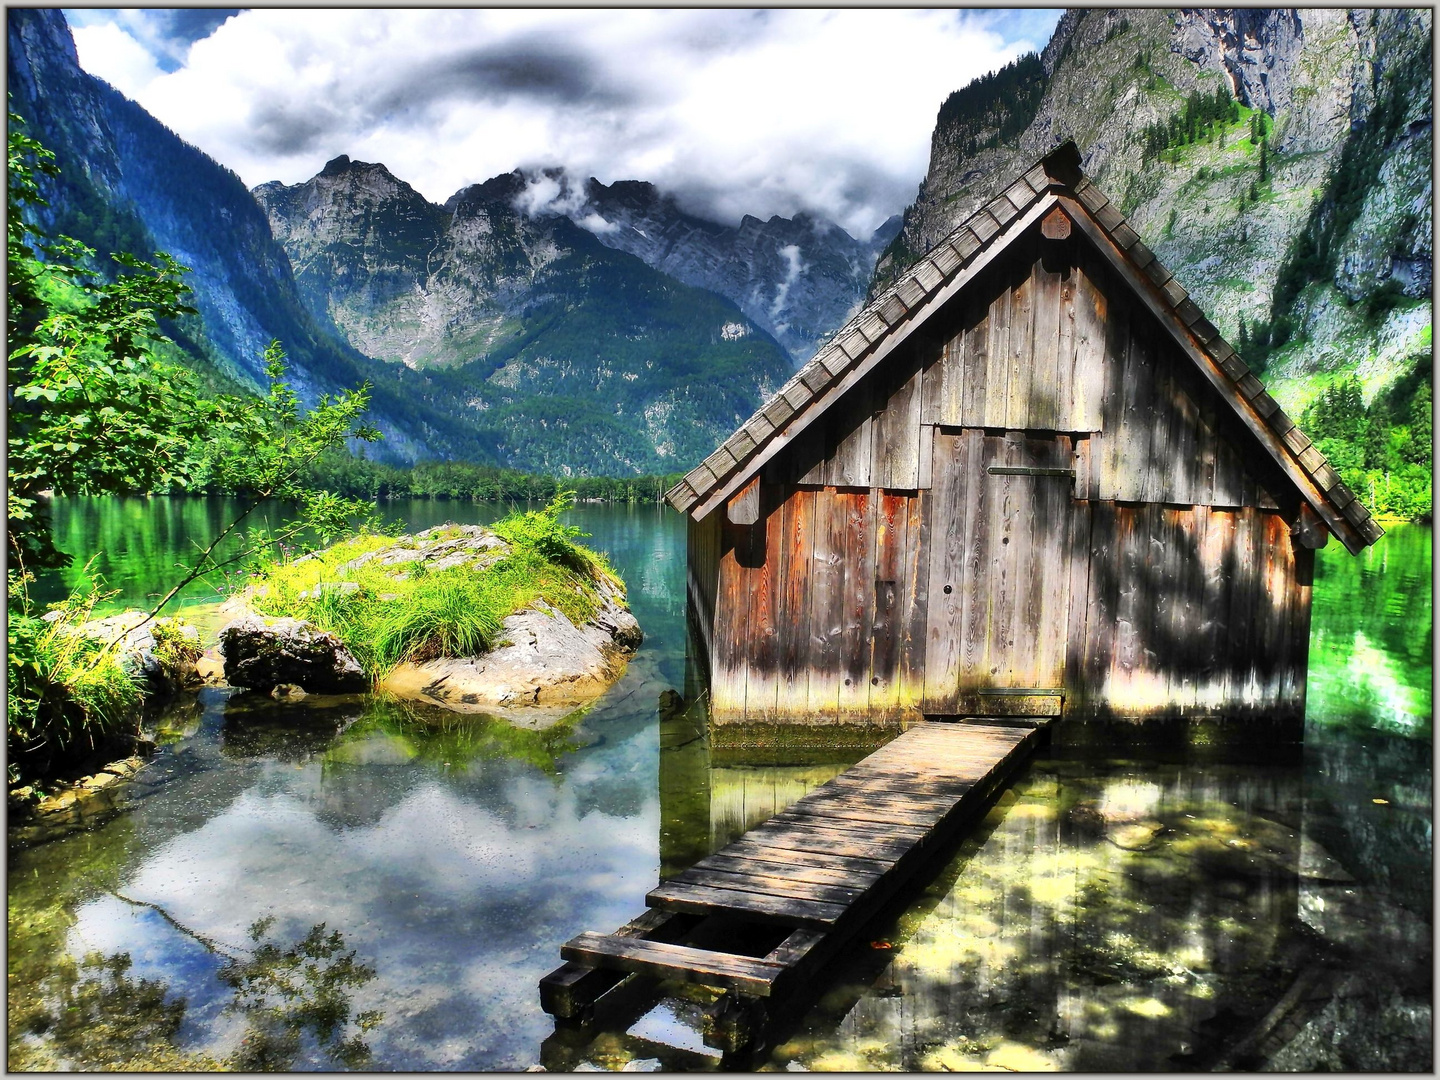 Obersee in HDR